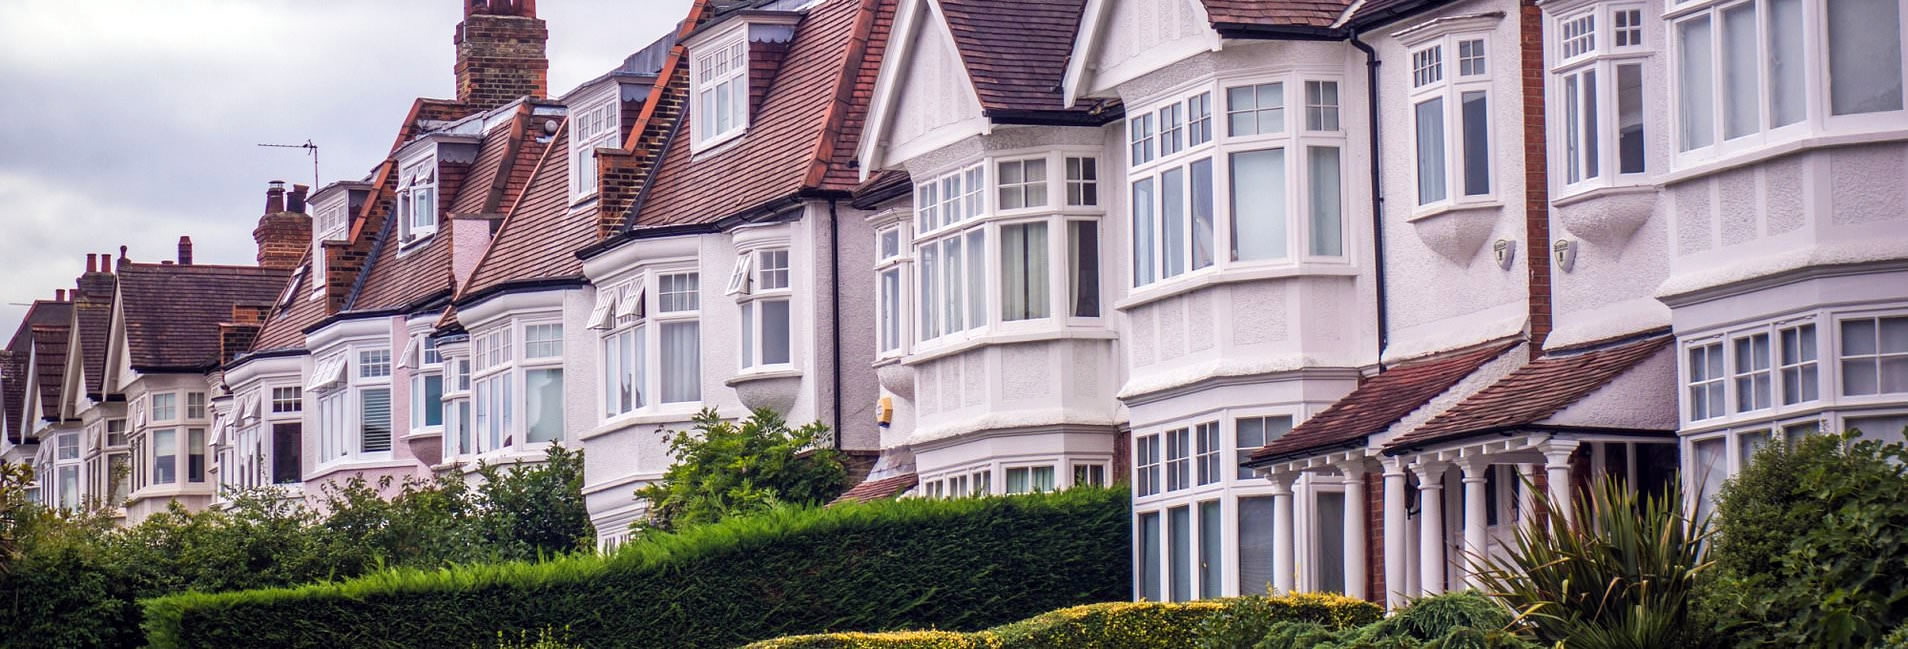 What’s the Latest on House Prices in England and Wales?